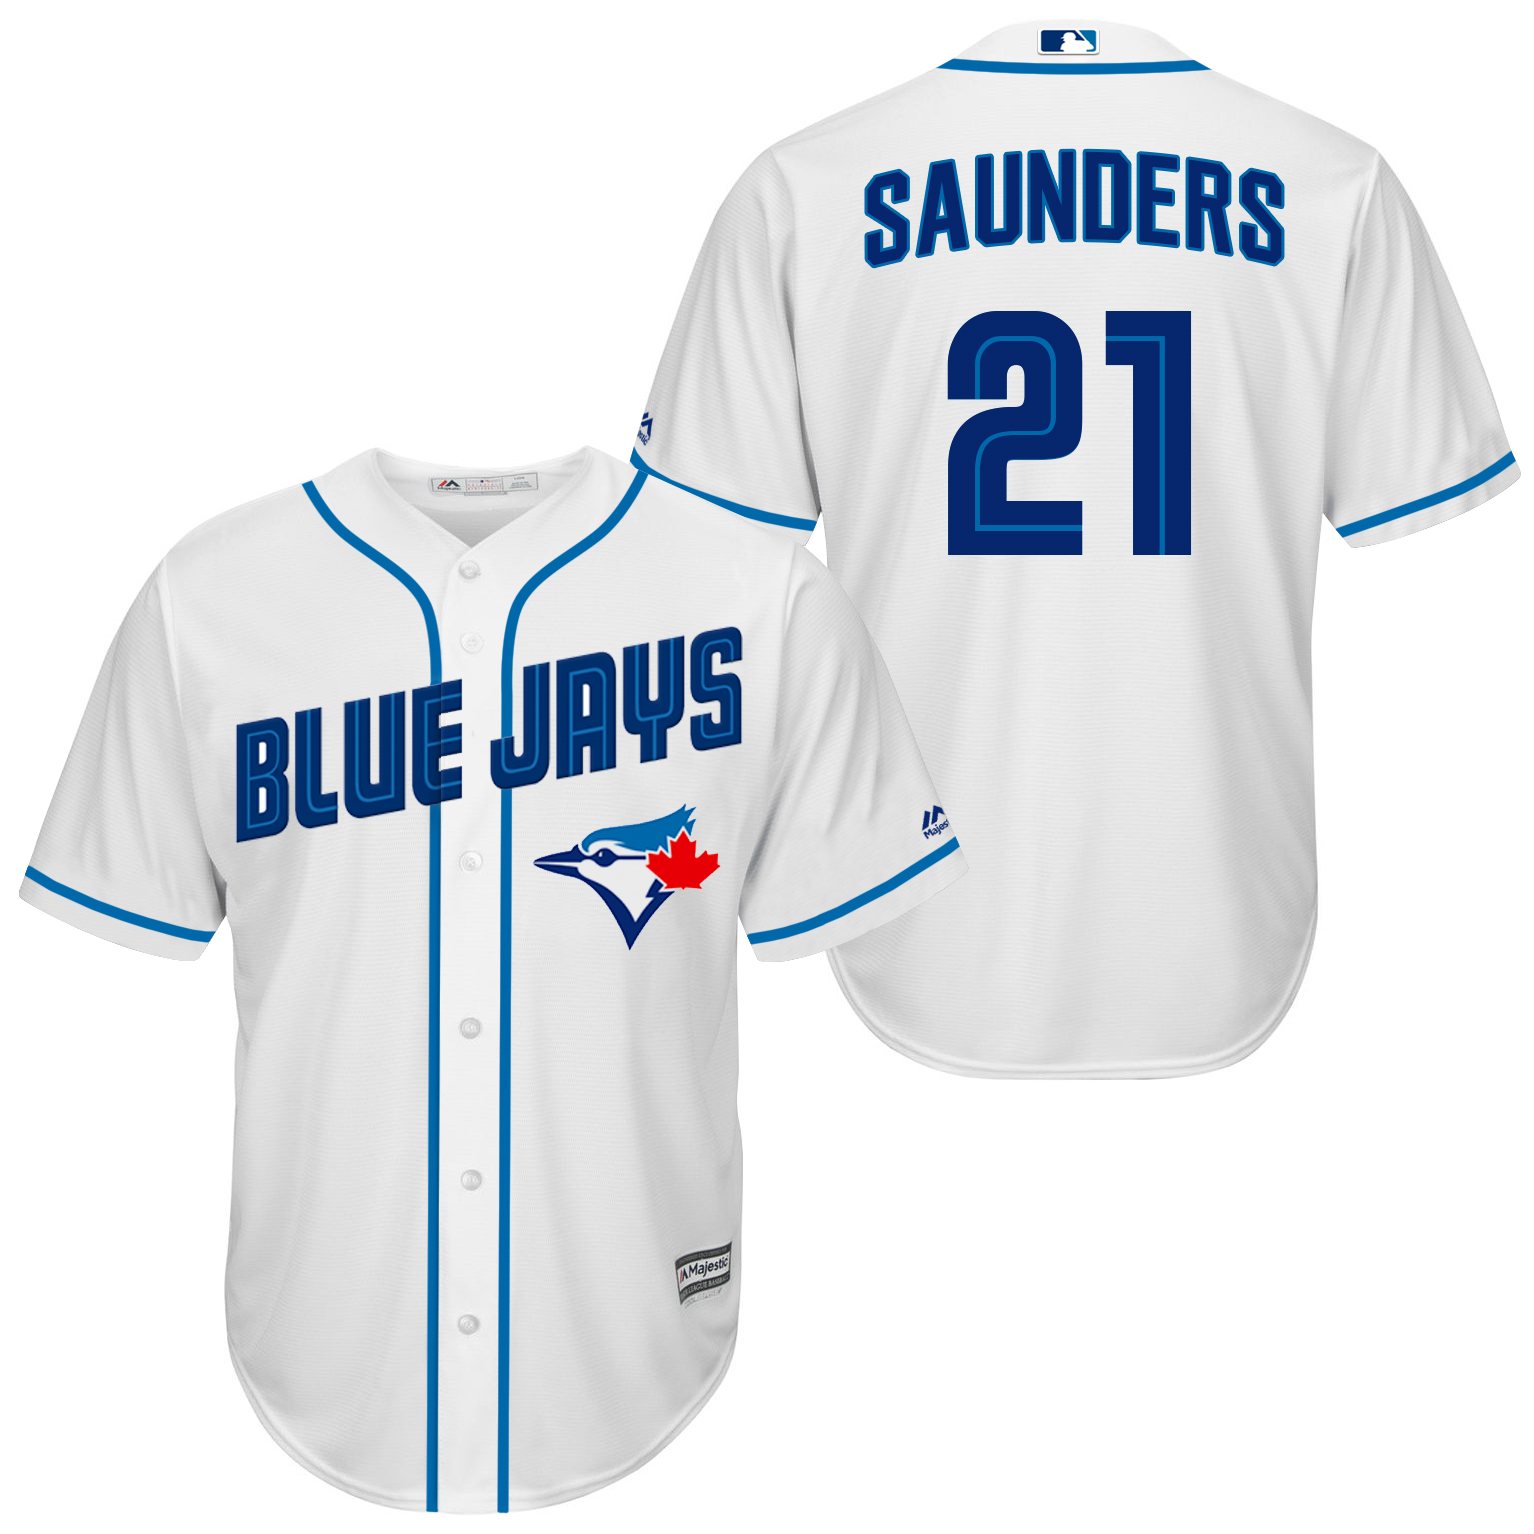 Blue Jays 21 Michael Saunders White New Cool Base Jersey